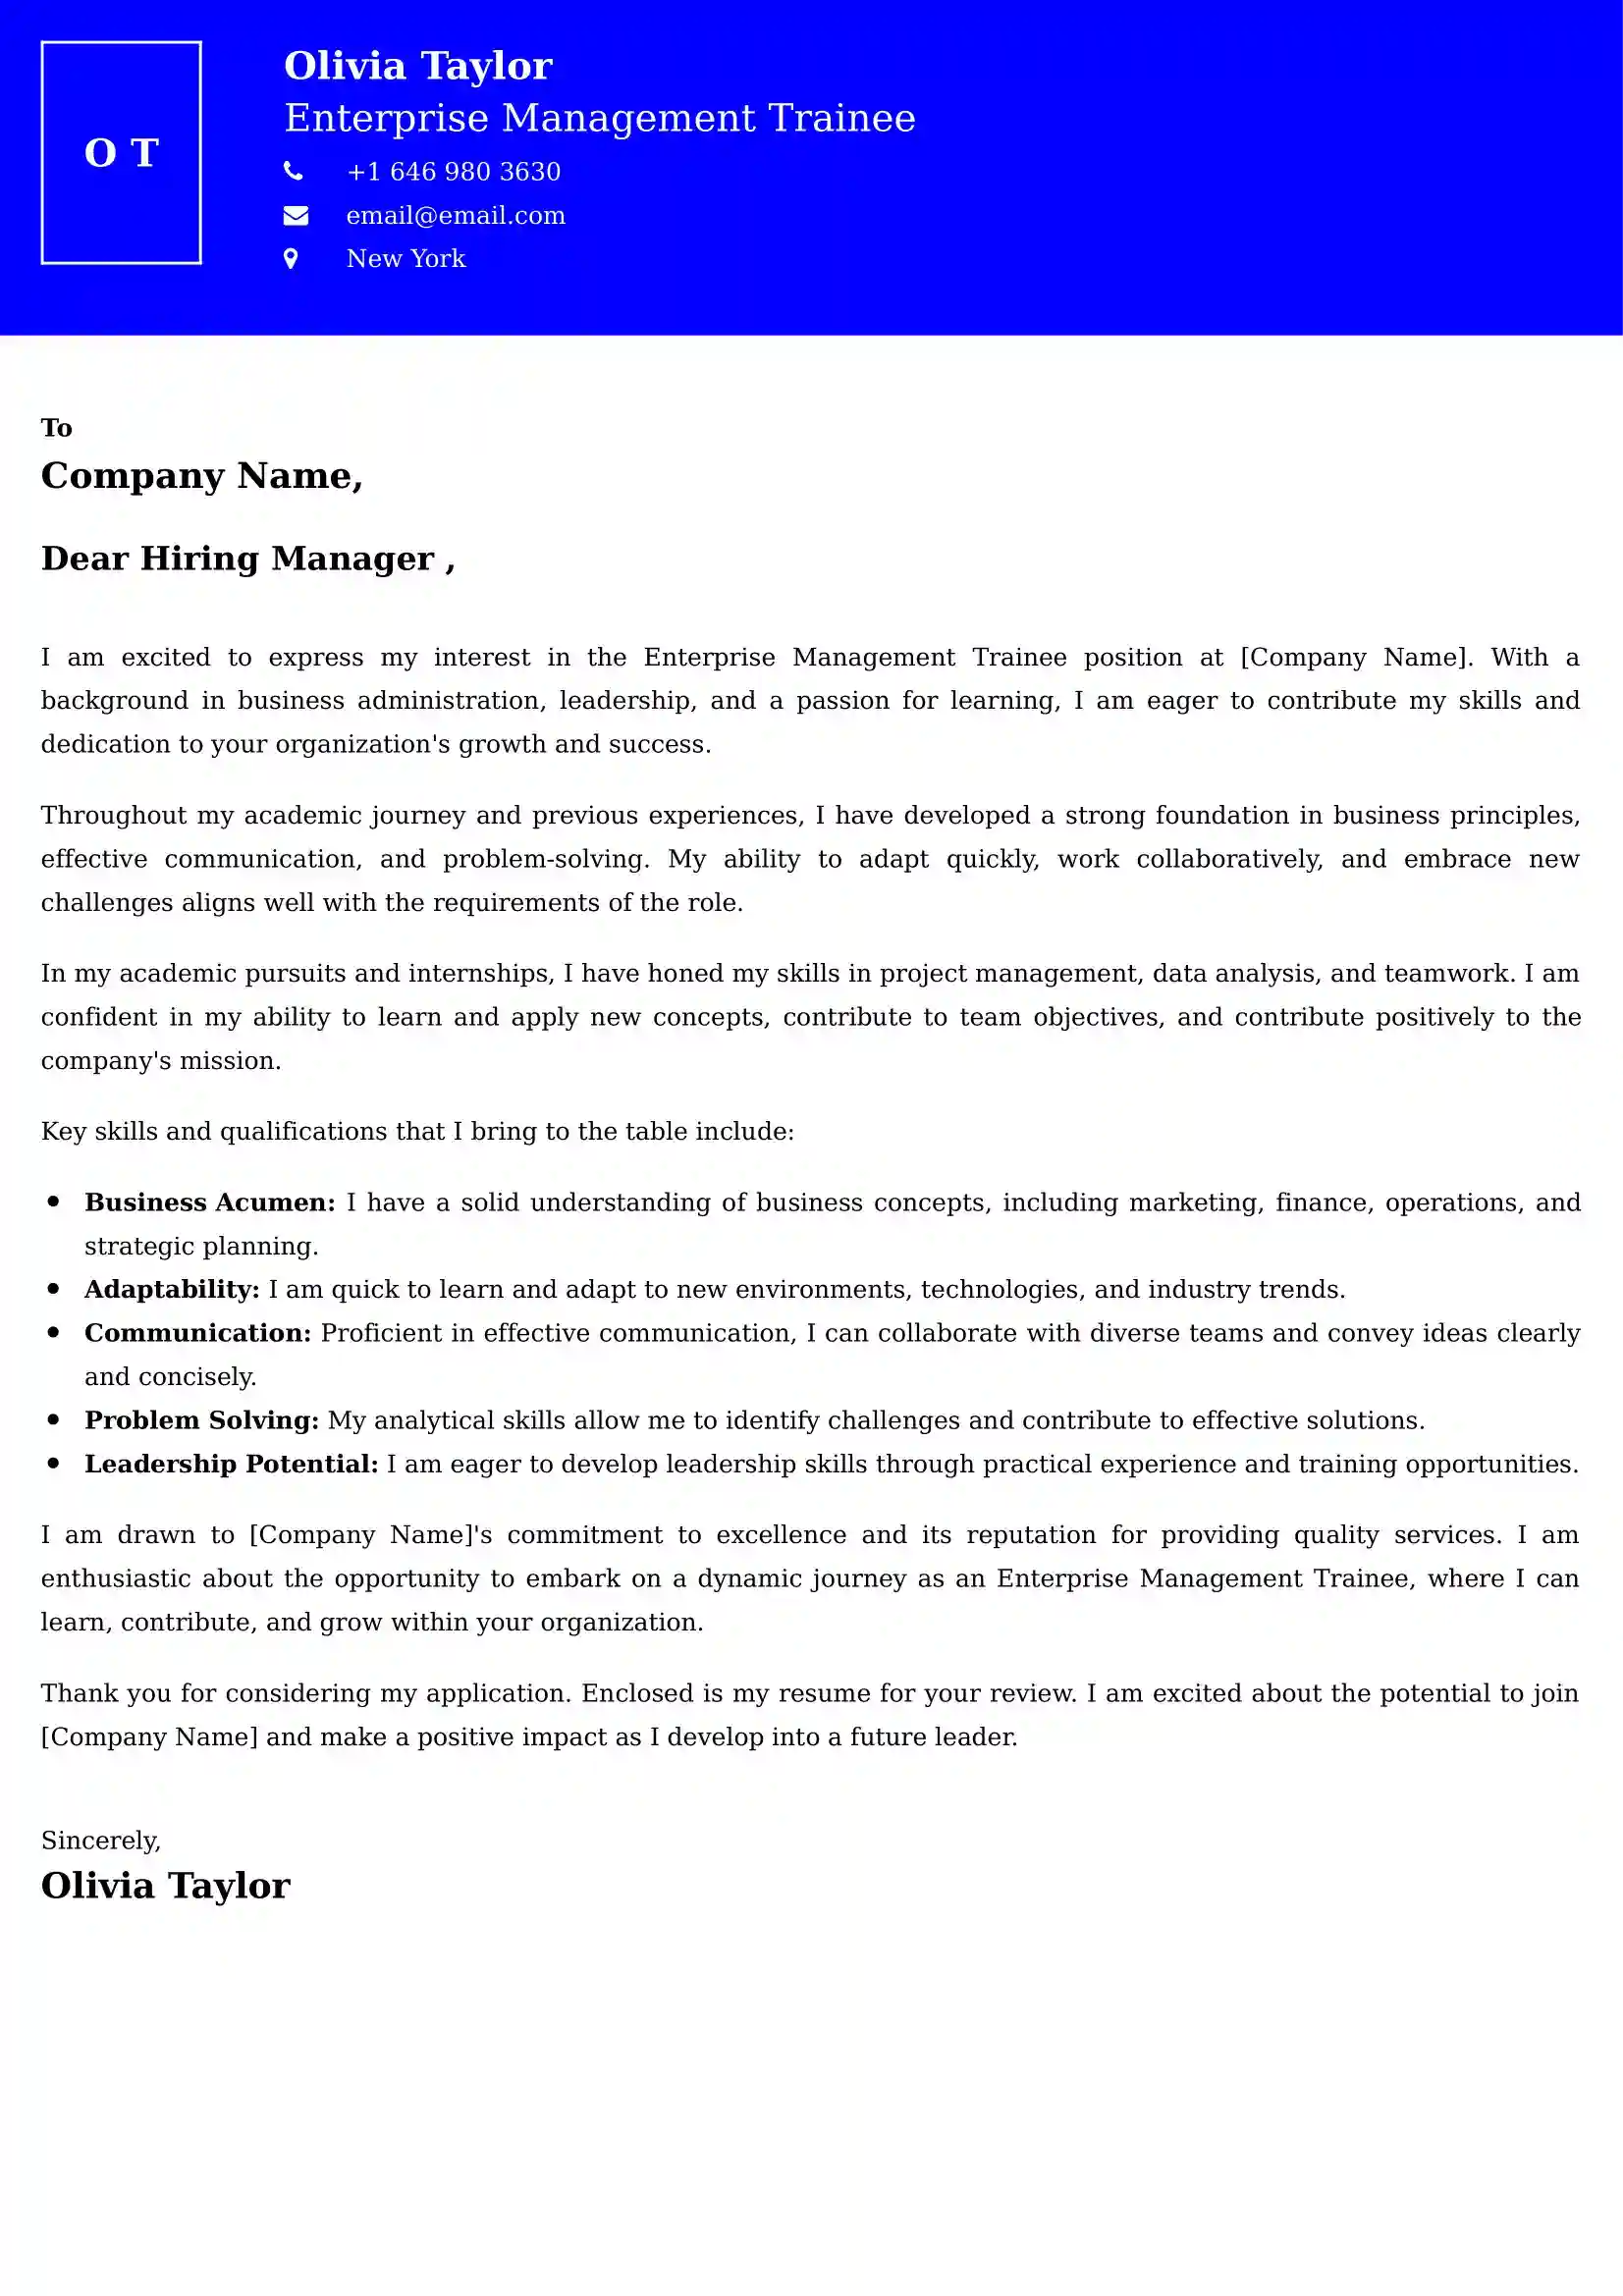 Enterprise Management Trainee Cover Letter Examples for UAE 